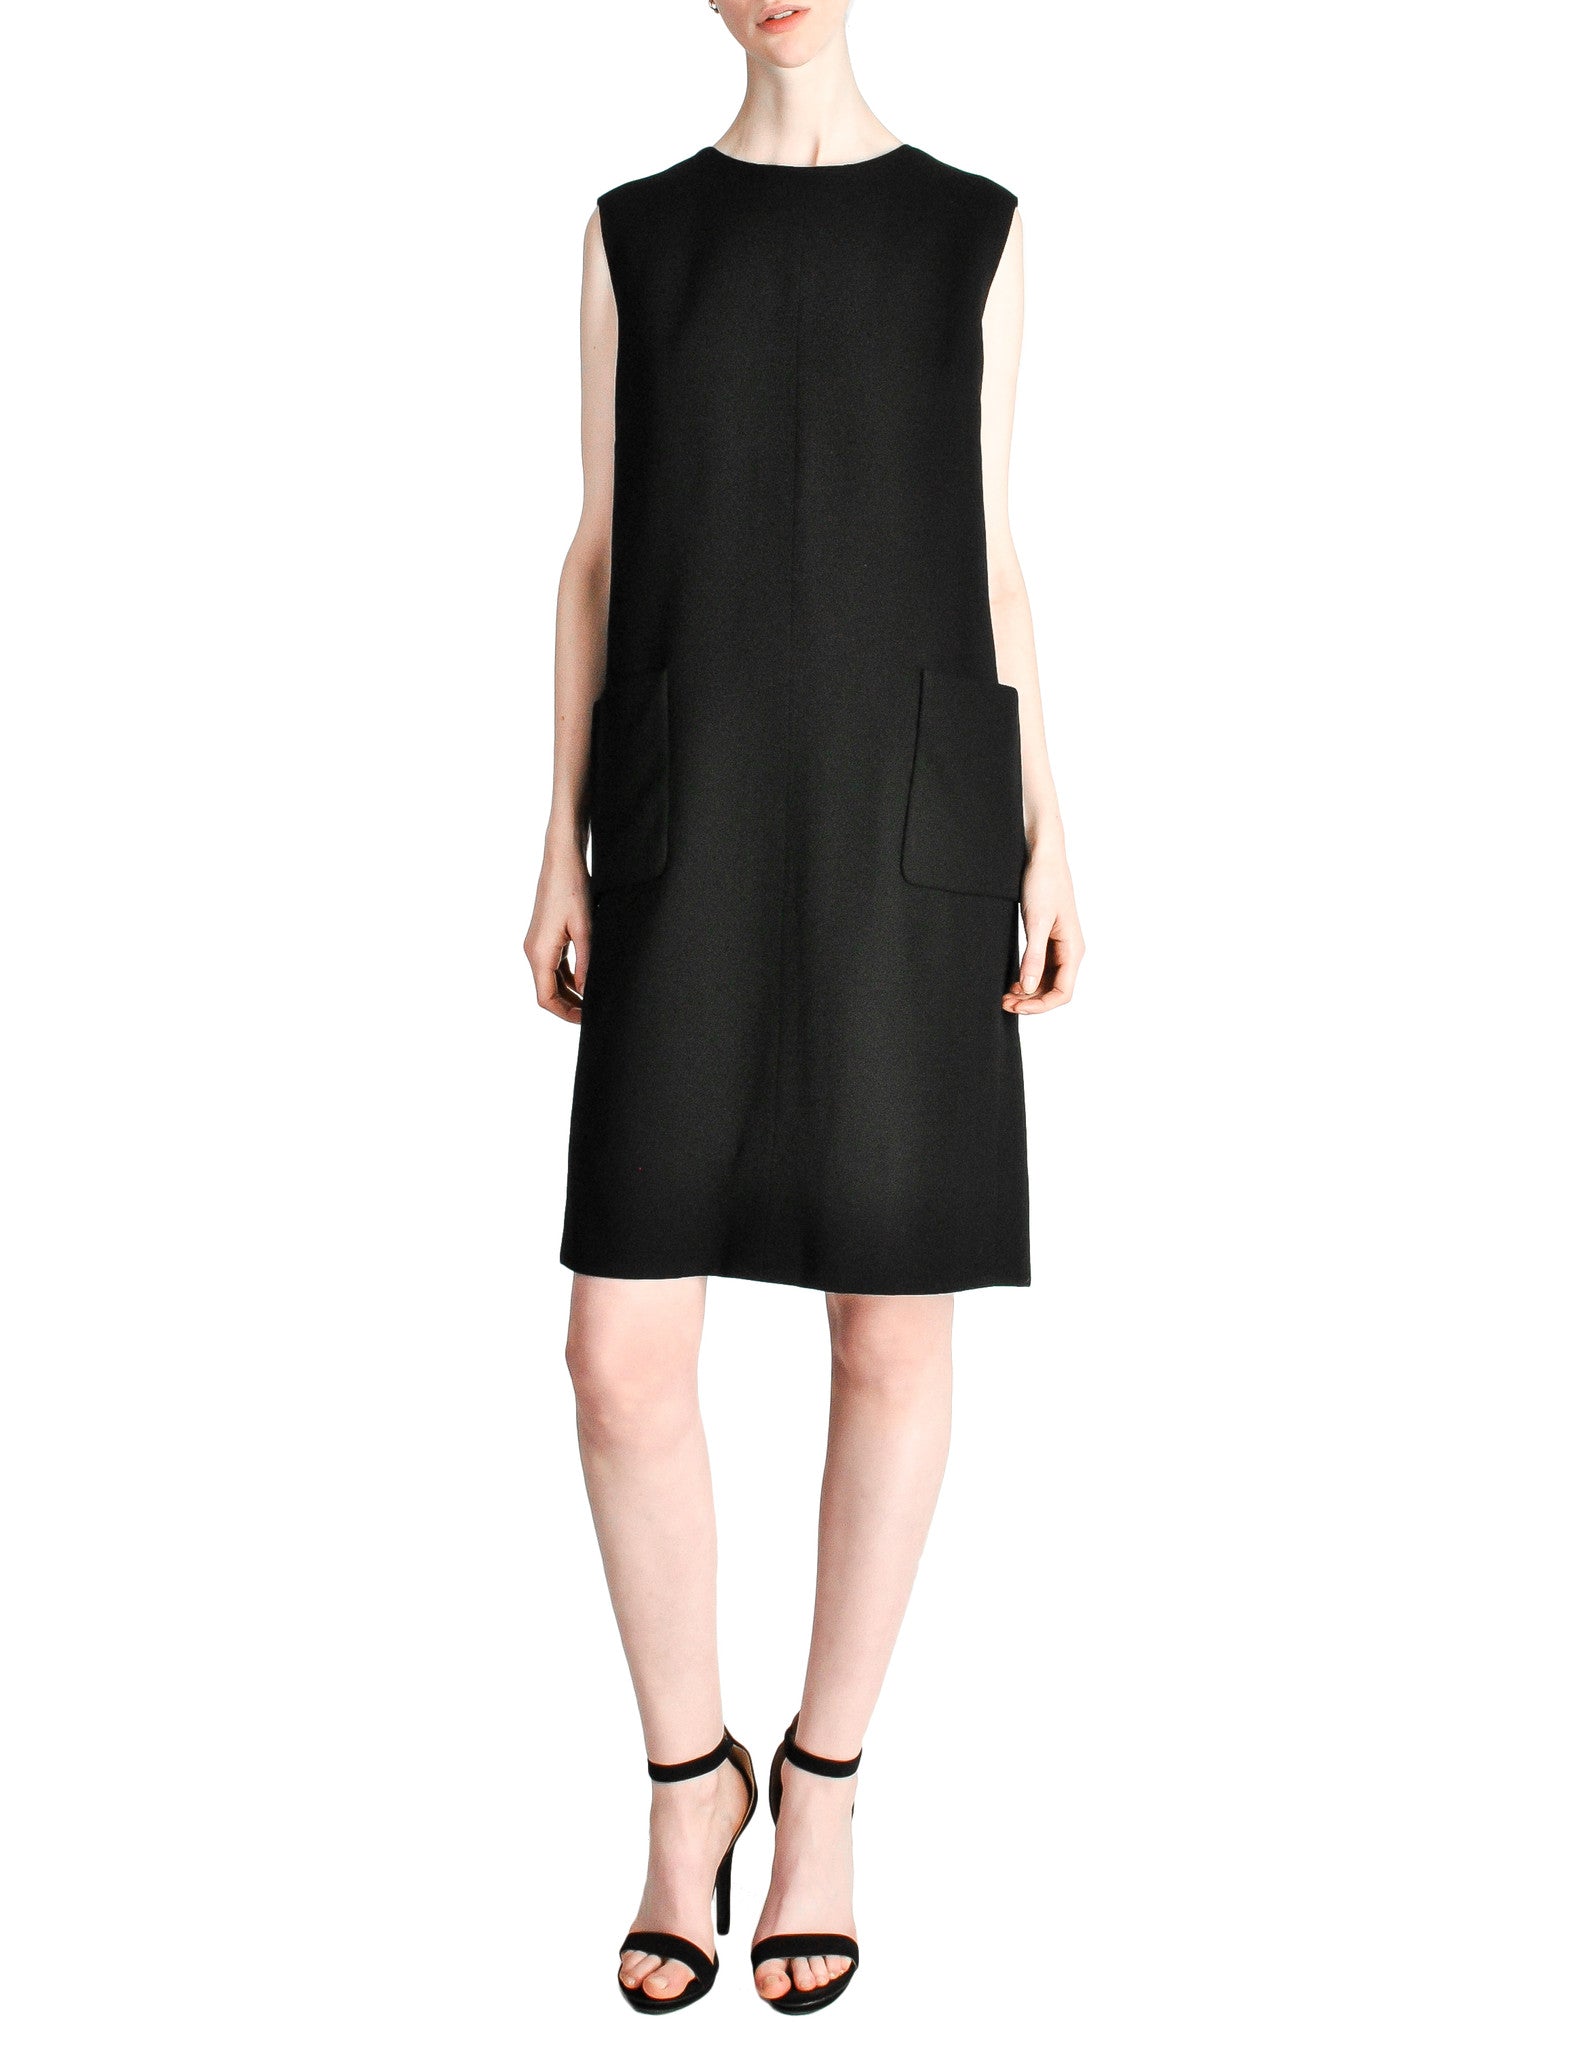 Norman Norell Vintage Black Wool Shift Dress - from Amarcord Vintage ...